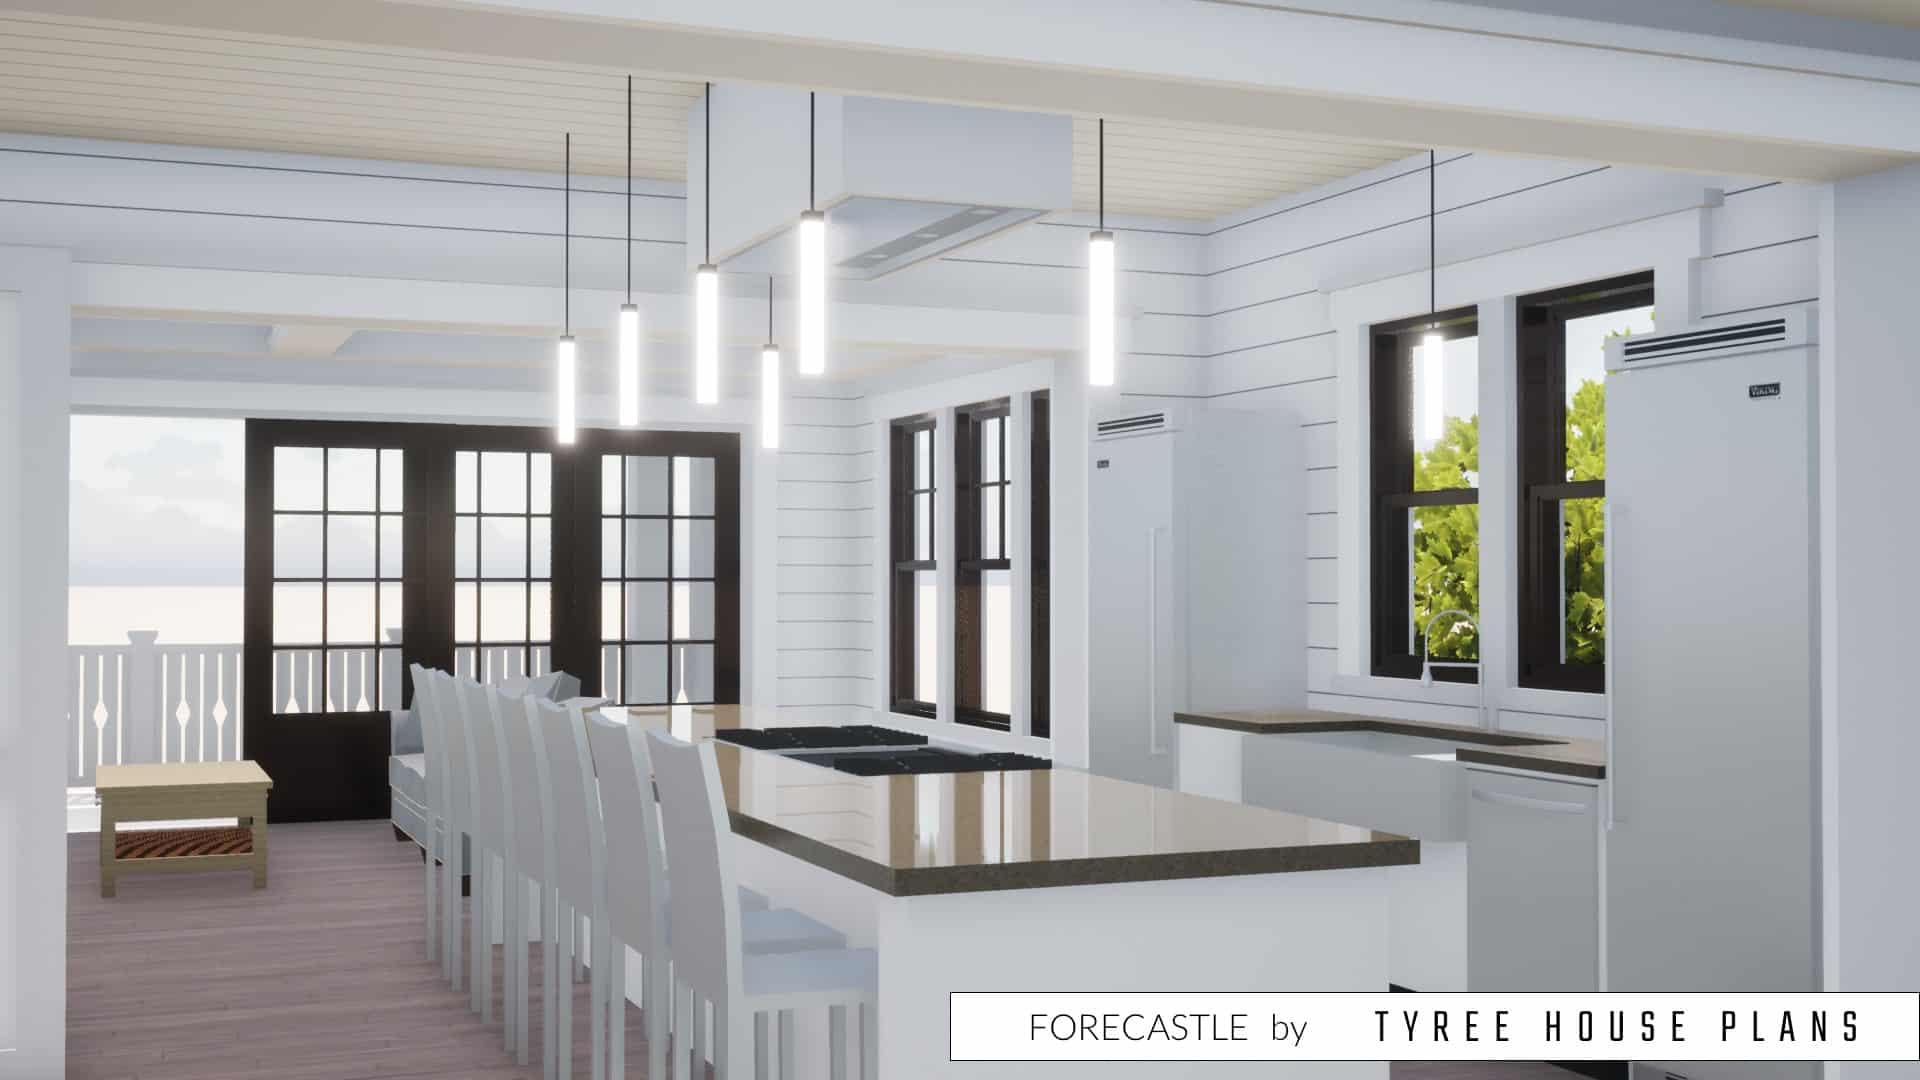 Kitchen island with seating. Forecastle by Tyree House Plans.